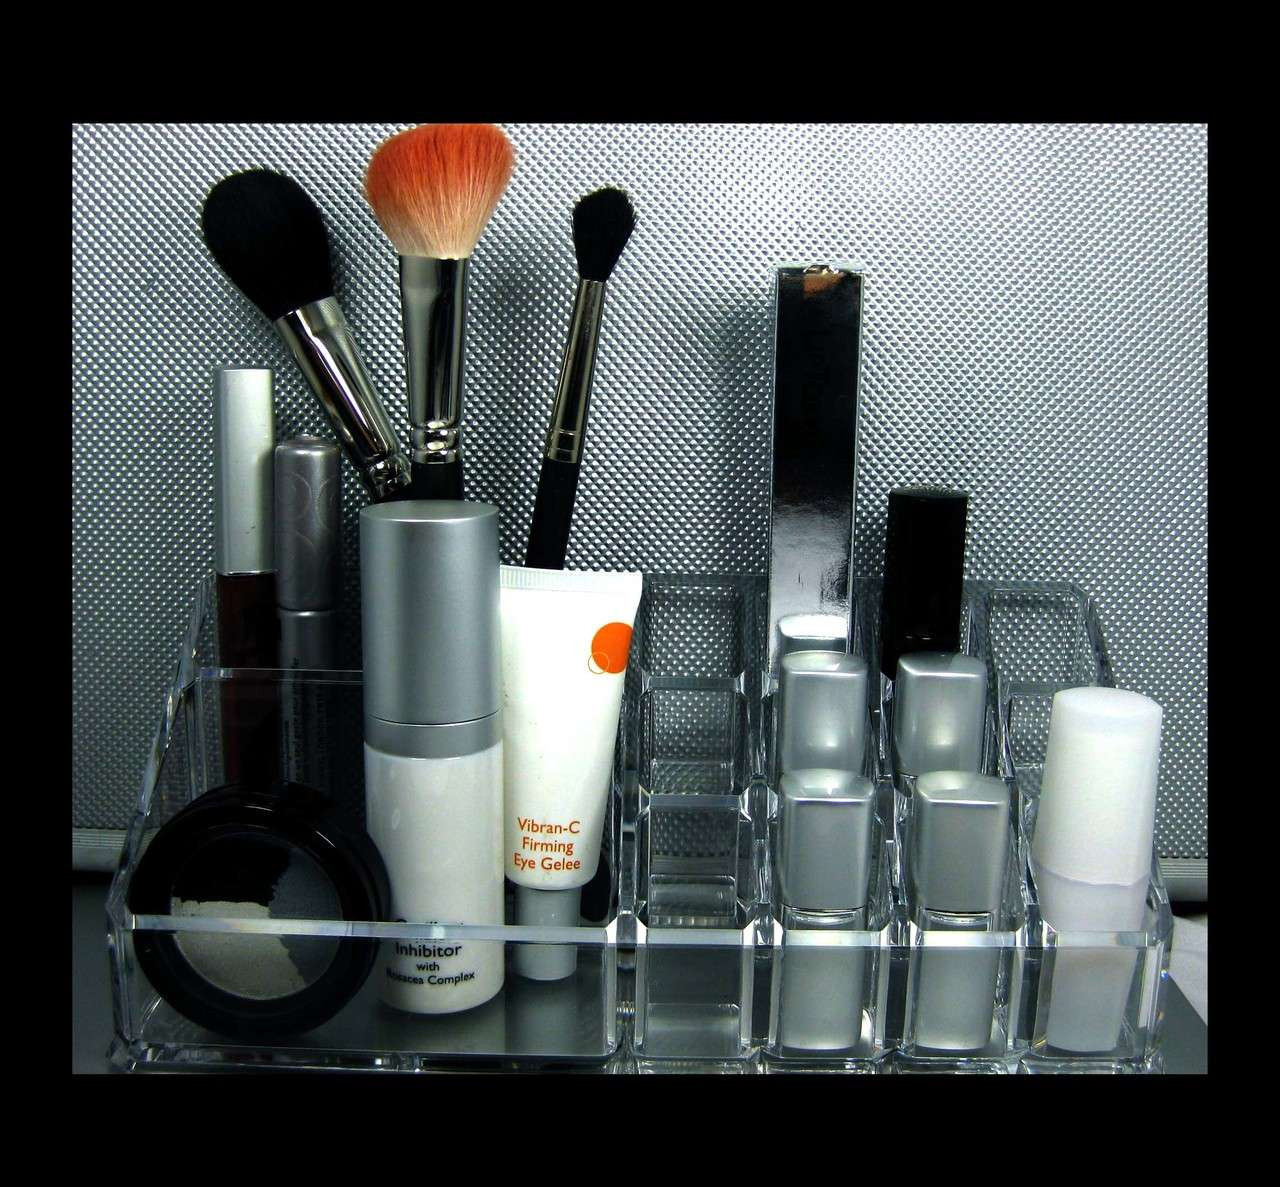 https://cdn11.bigcommerce.com/s-qd7k5gxi/images/stencil/1280x1280/products/350/6808/Acrylic-Cosmetic-Organizers-Luxury-Vanity-Makeup-Storage-Tray-5631-Beauty-Makeup-Supply_4058__22424.1661384437.jpg?c=2